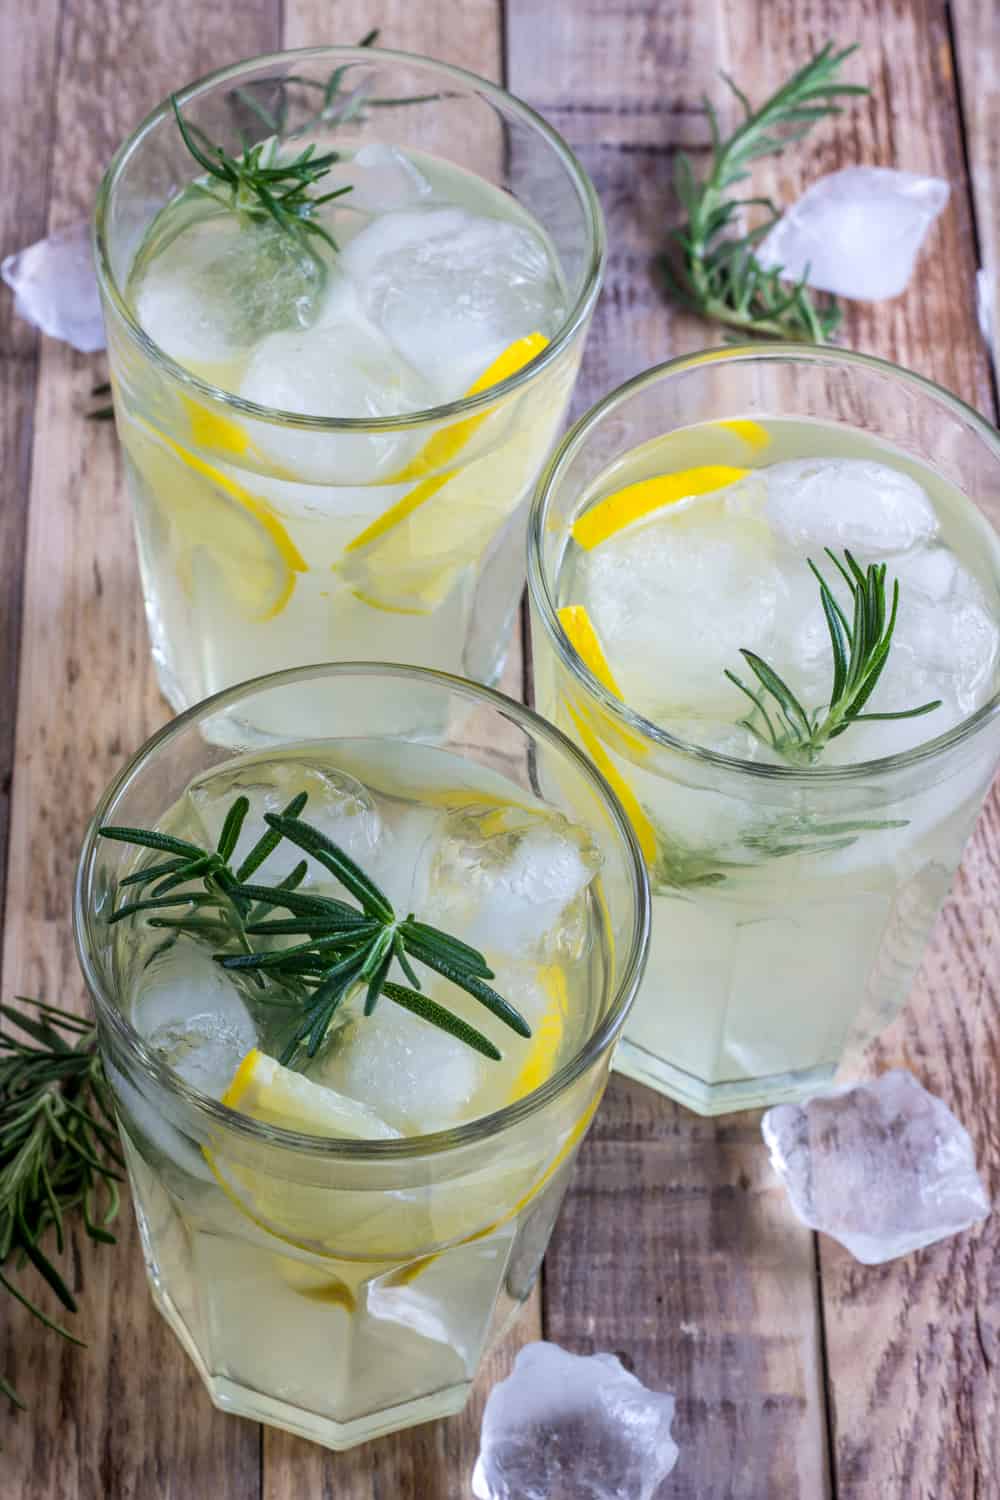 4 Tips To Tell if Tonic Water has Gone Bad